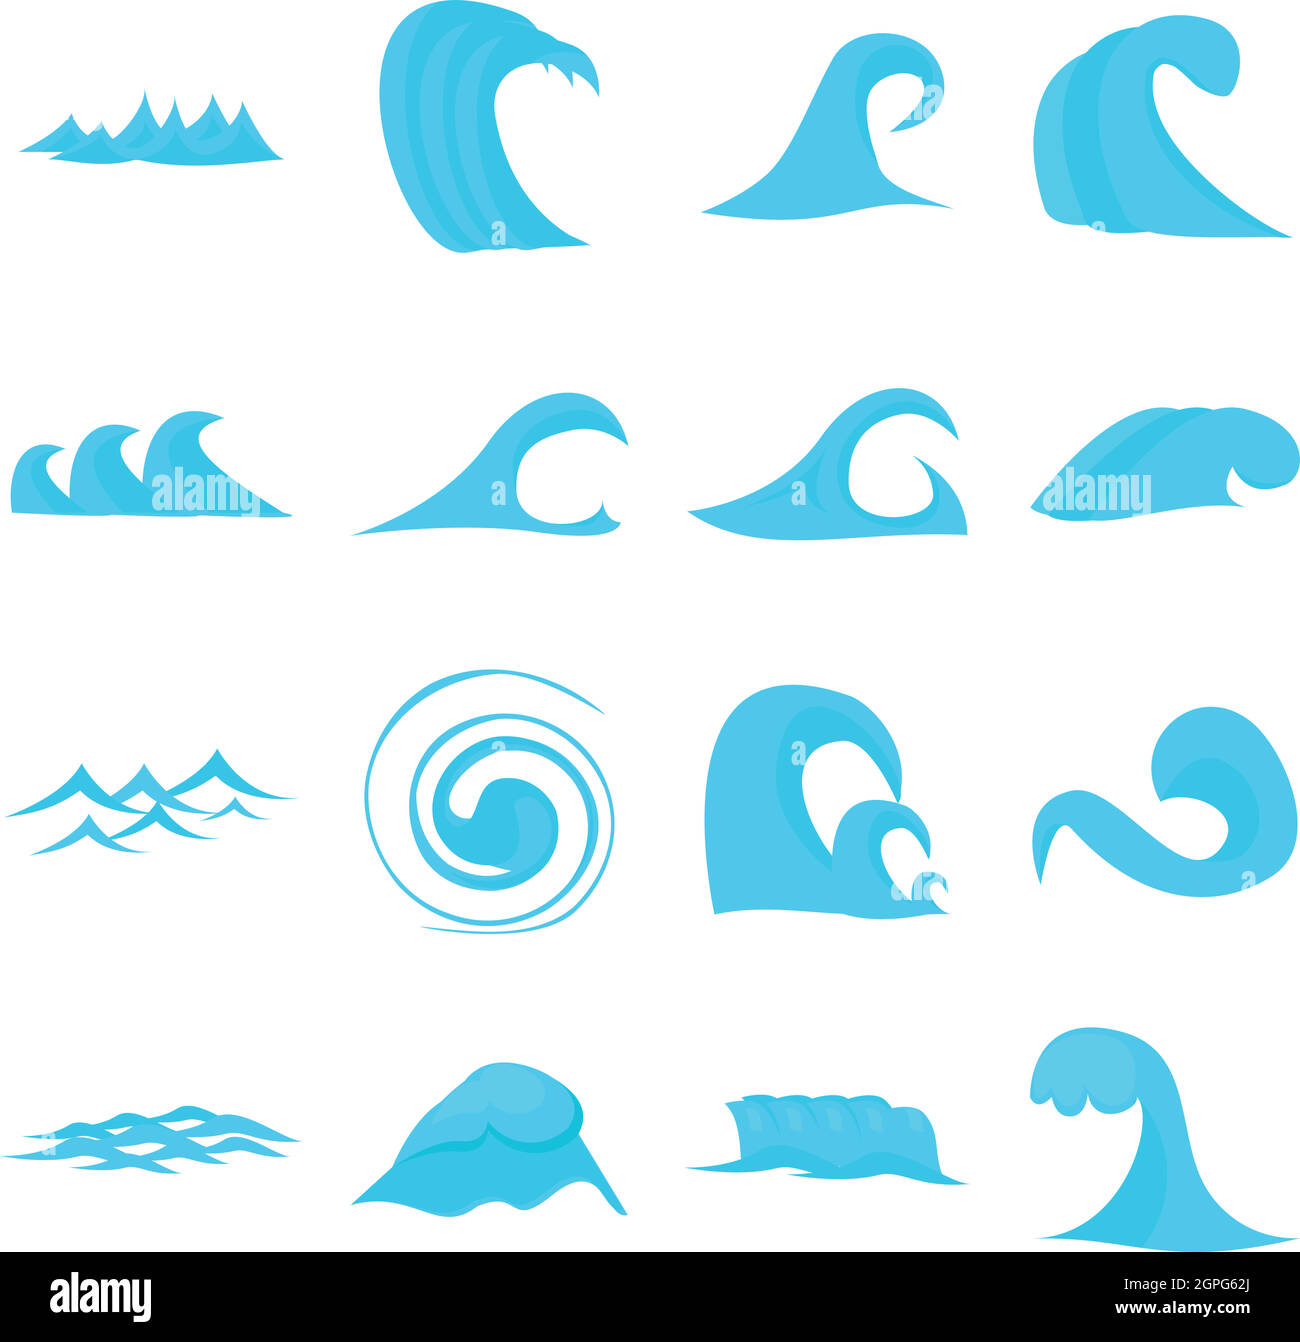 Waves icons set, flat style Stock Vector